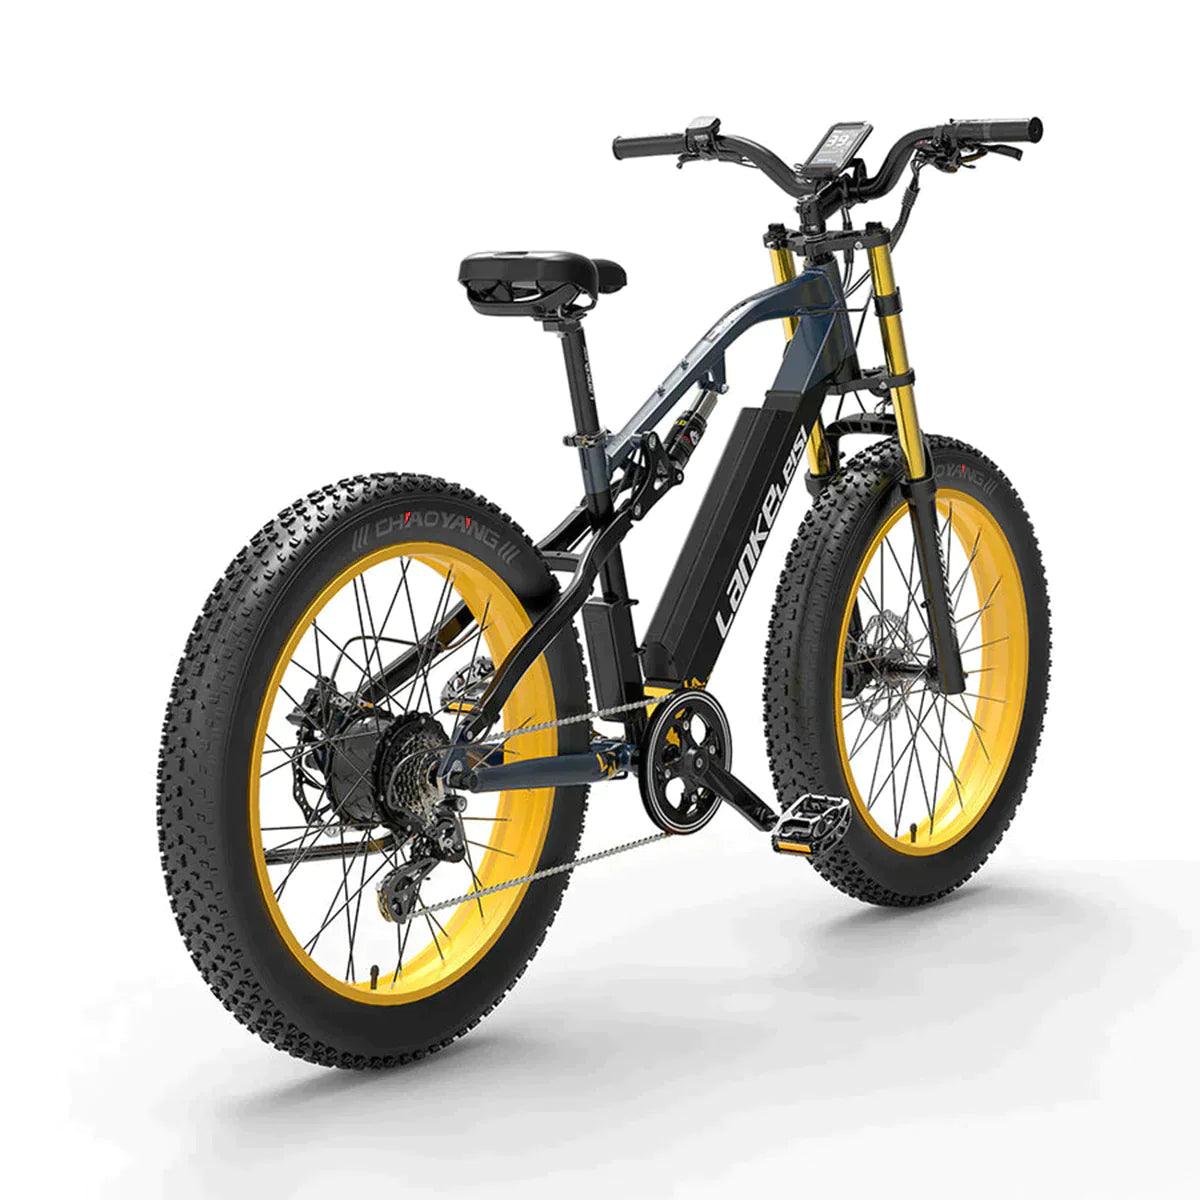 Lankeleisi RV700 Electric Mountain Bike - Pogo Cycles available in cycle to work